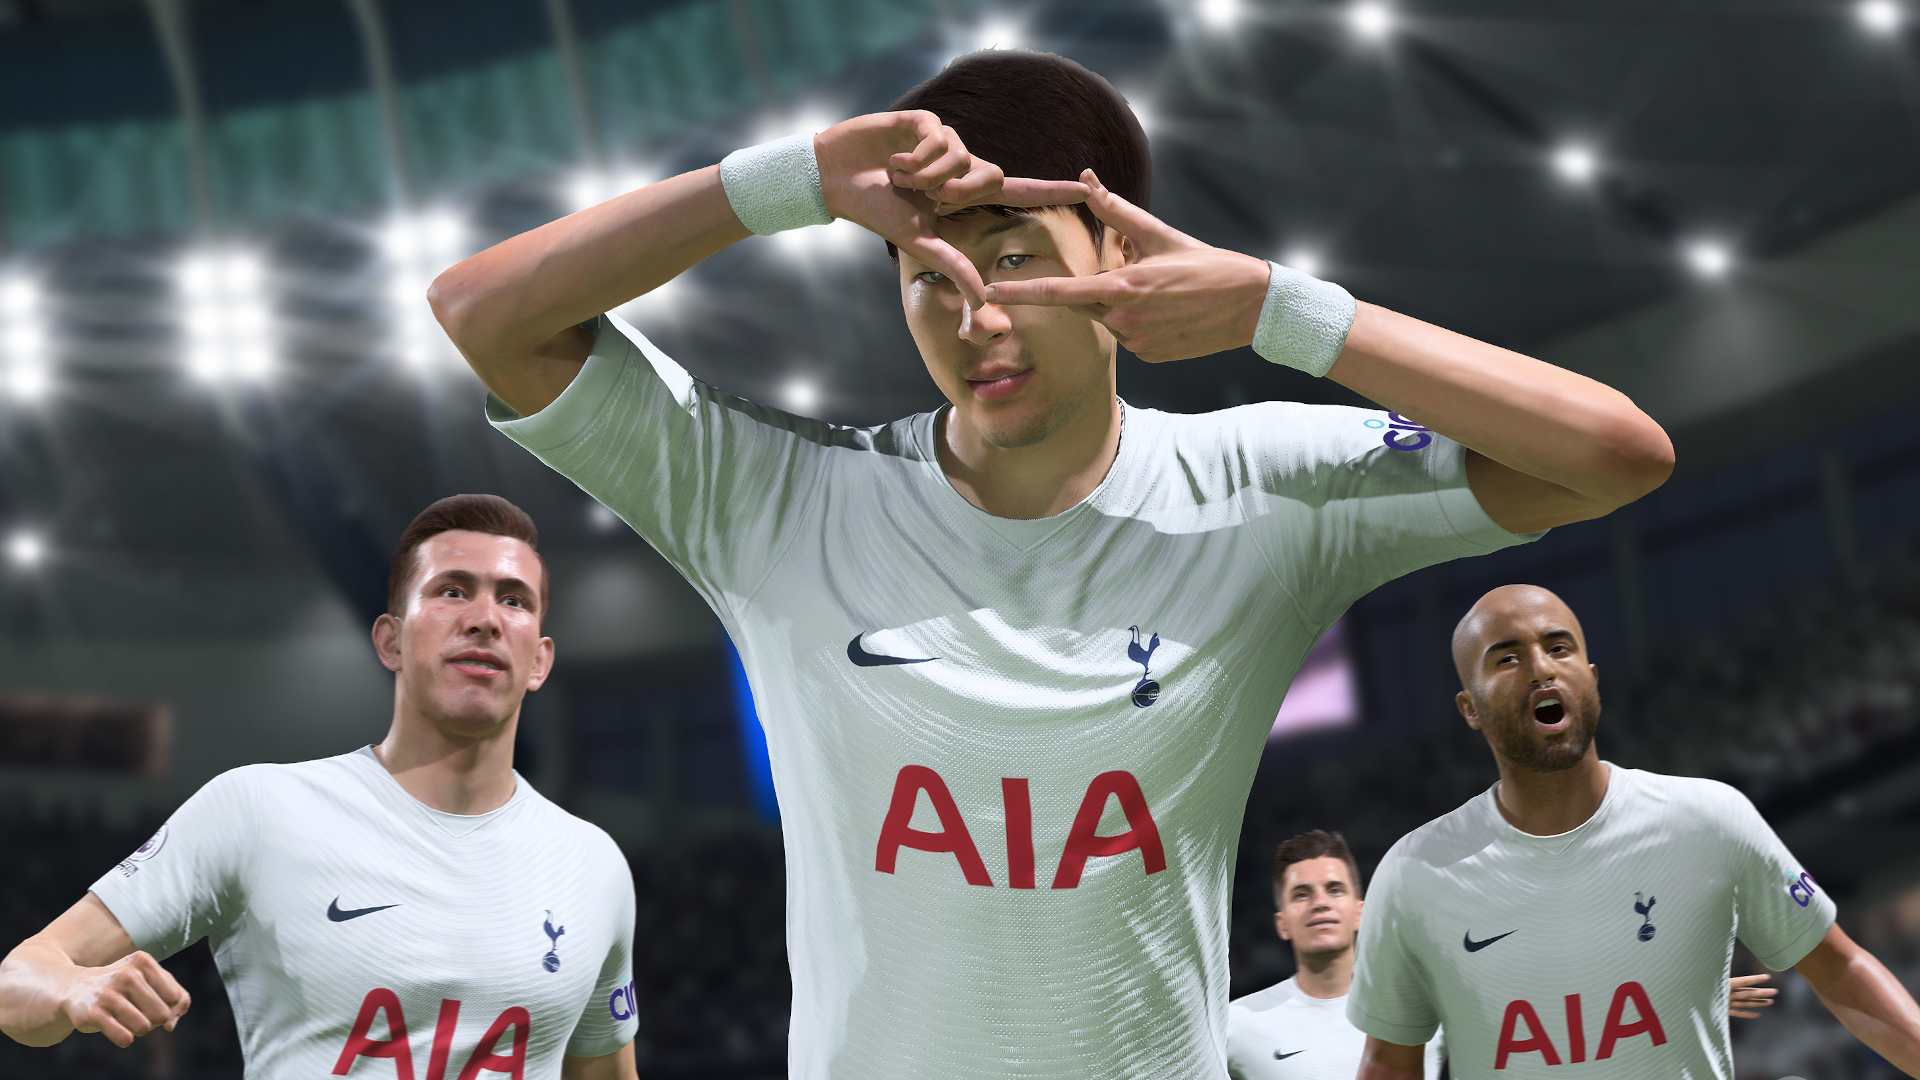 FIFA 22 Division Rivals: Son celebrates a goal by making a camera sign with his hands